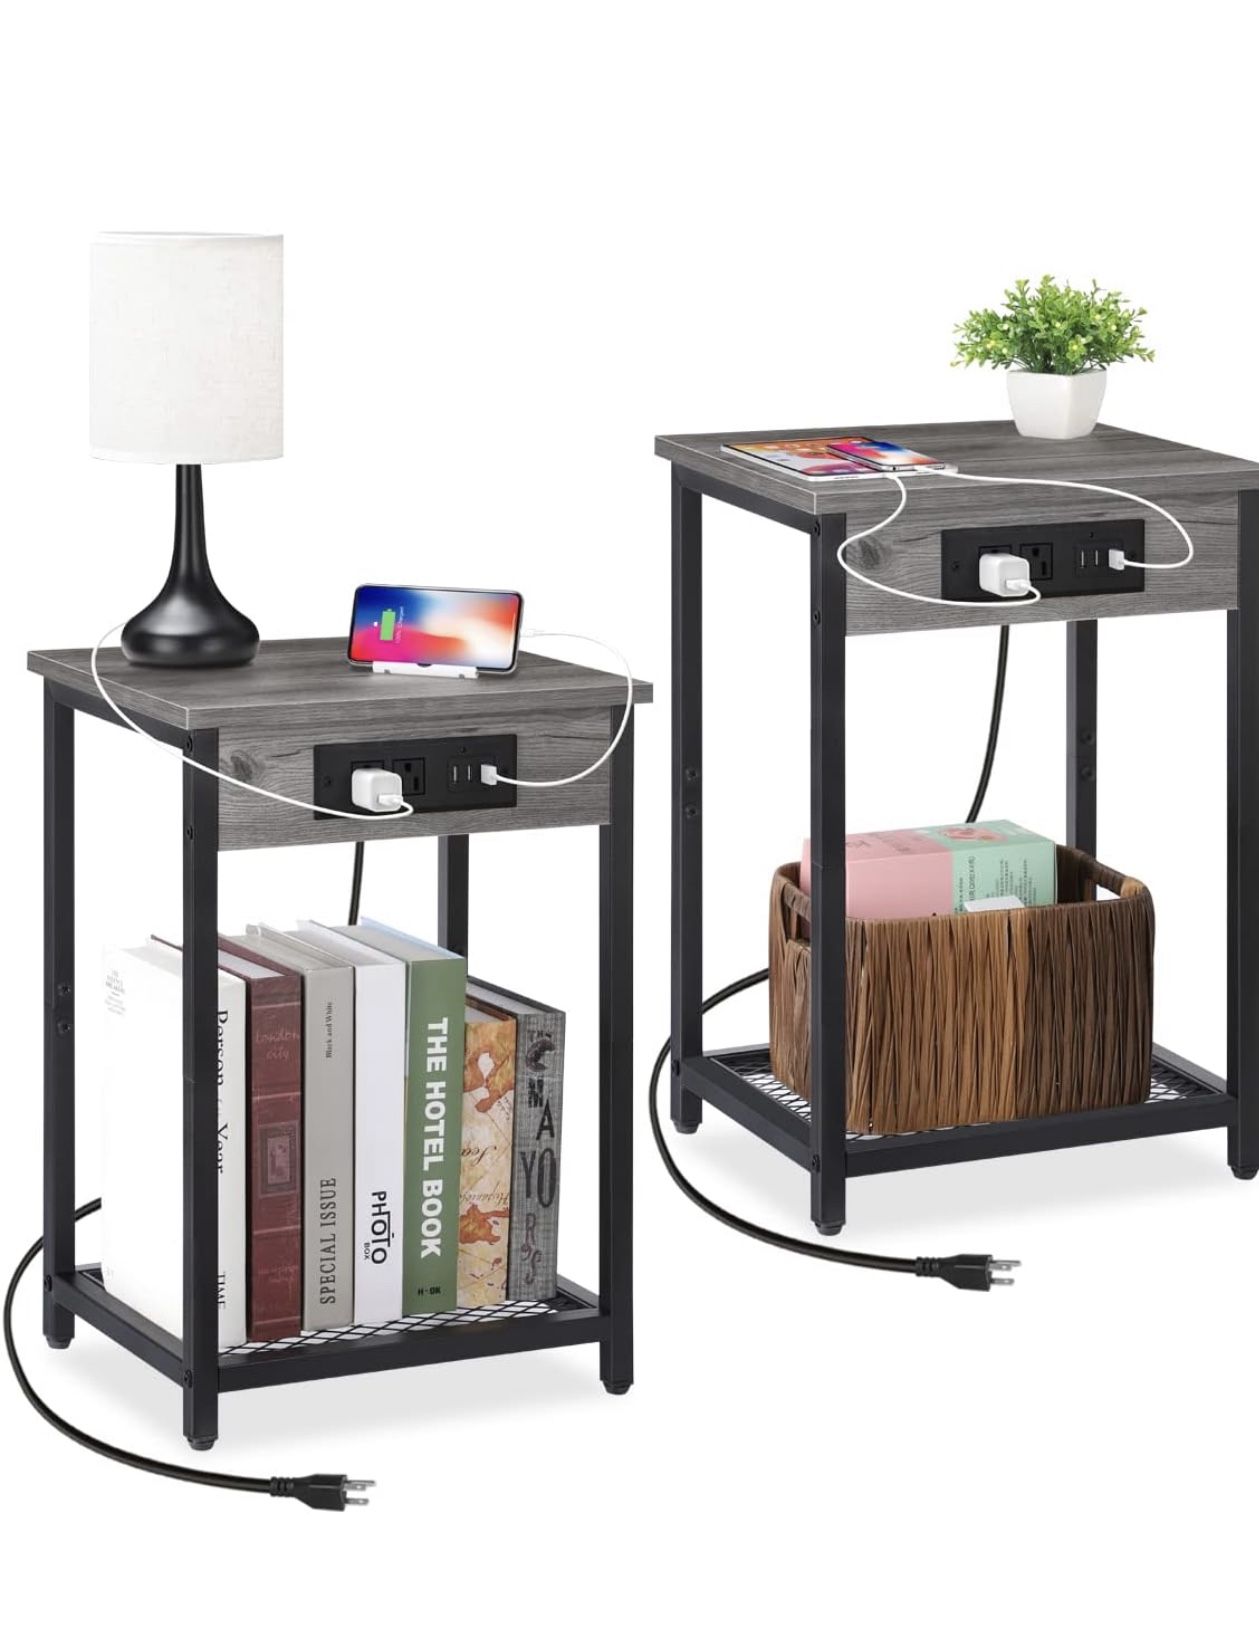 Nightstands 2 with Charging Station, 2 Tier Bedside Table with USB Ports and Outlets, Narrow End Table with Storage Shelf, Side Tables for Room,living